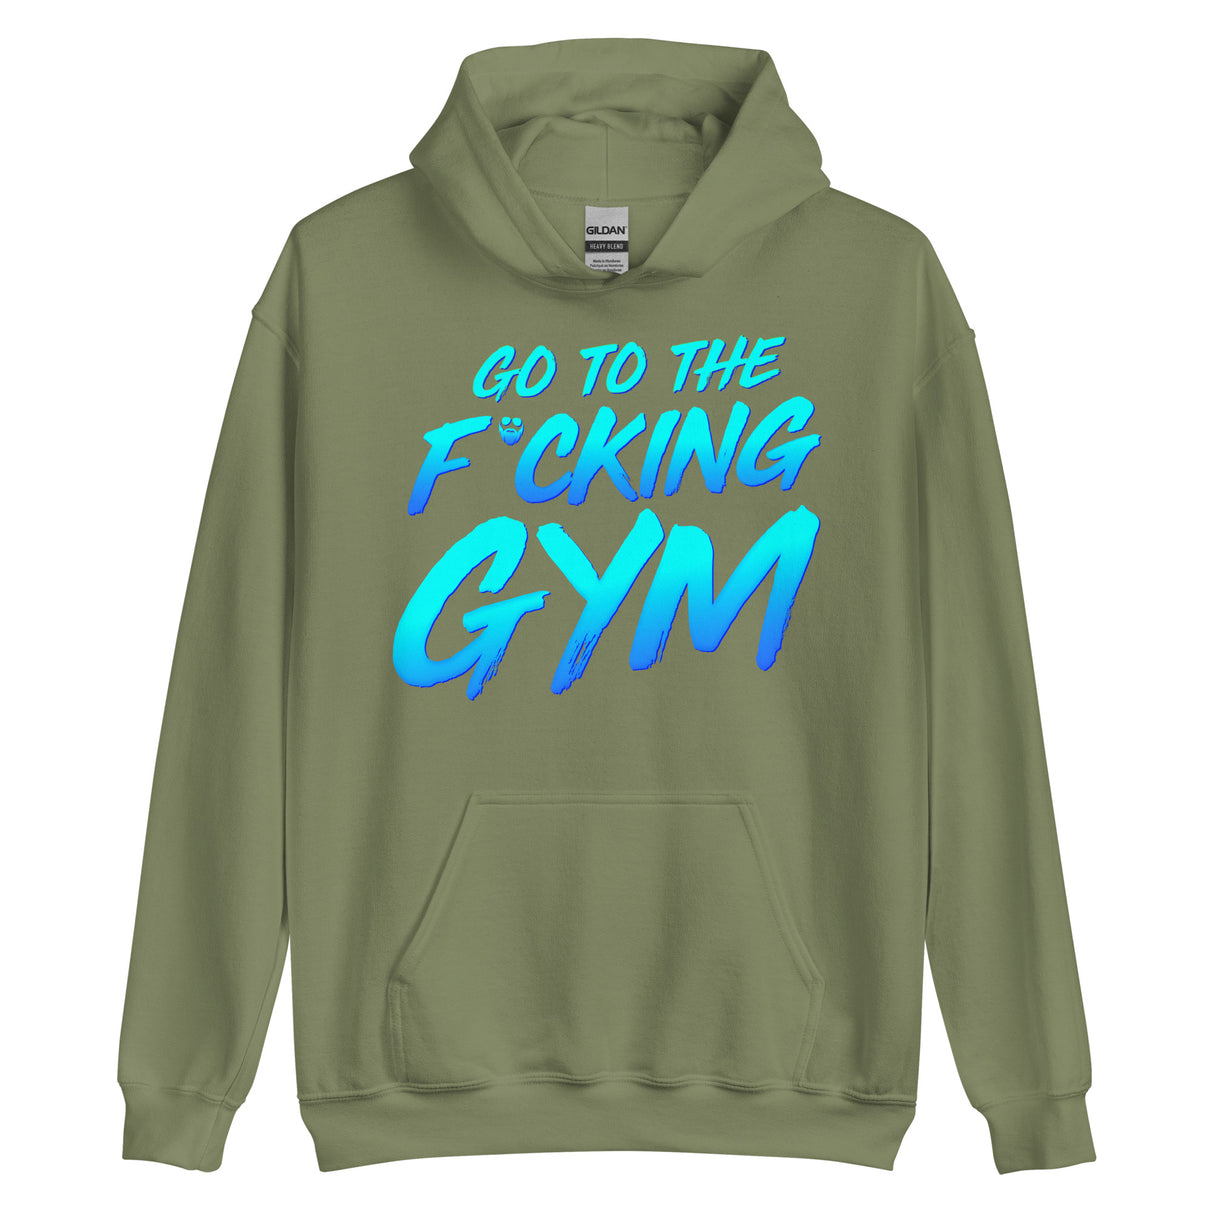 Go To The F*cking Gym Hoodie